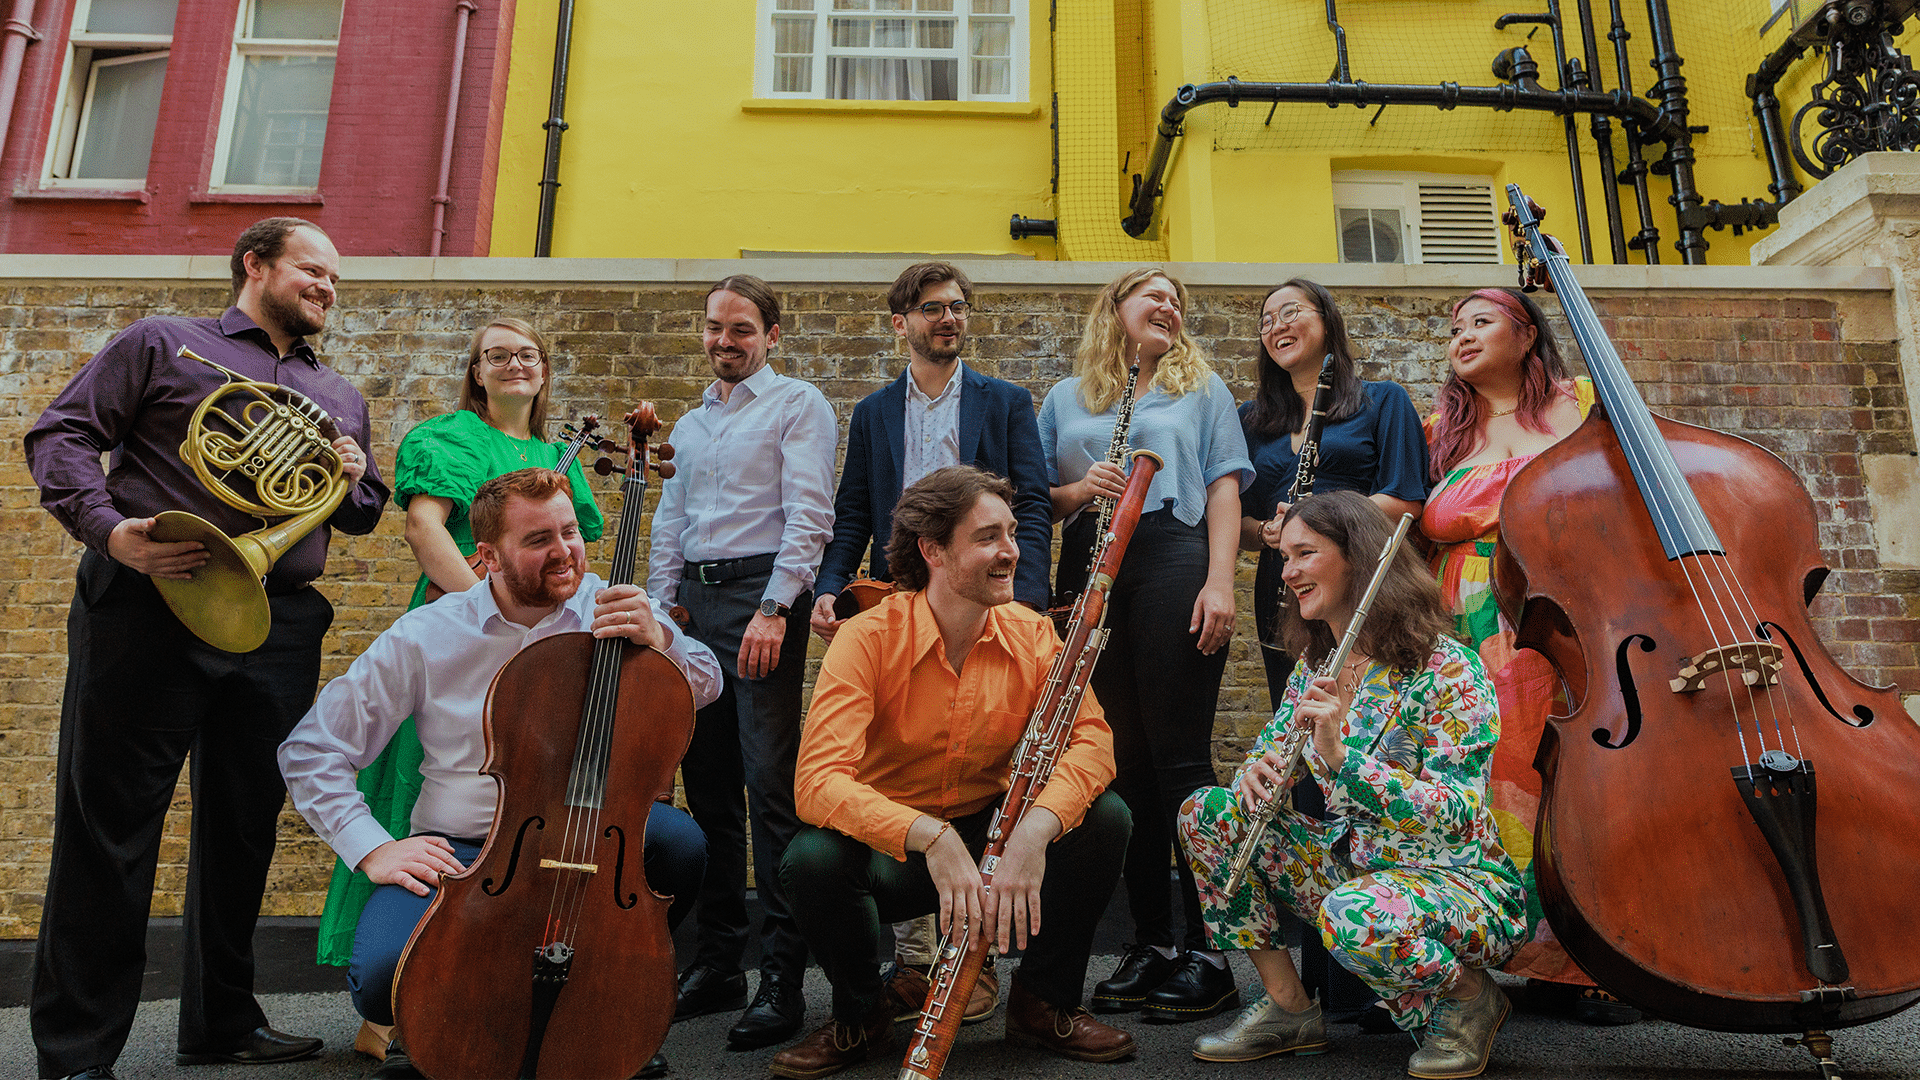 A collective of musicians smile at each other, they are holding various musical instruments including a bassoon, double bass and flute.